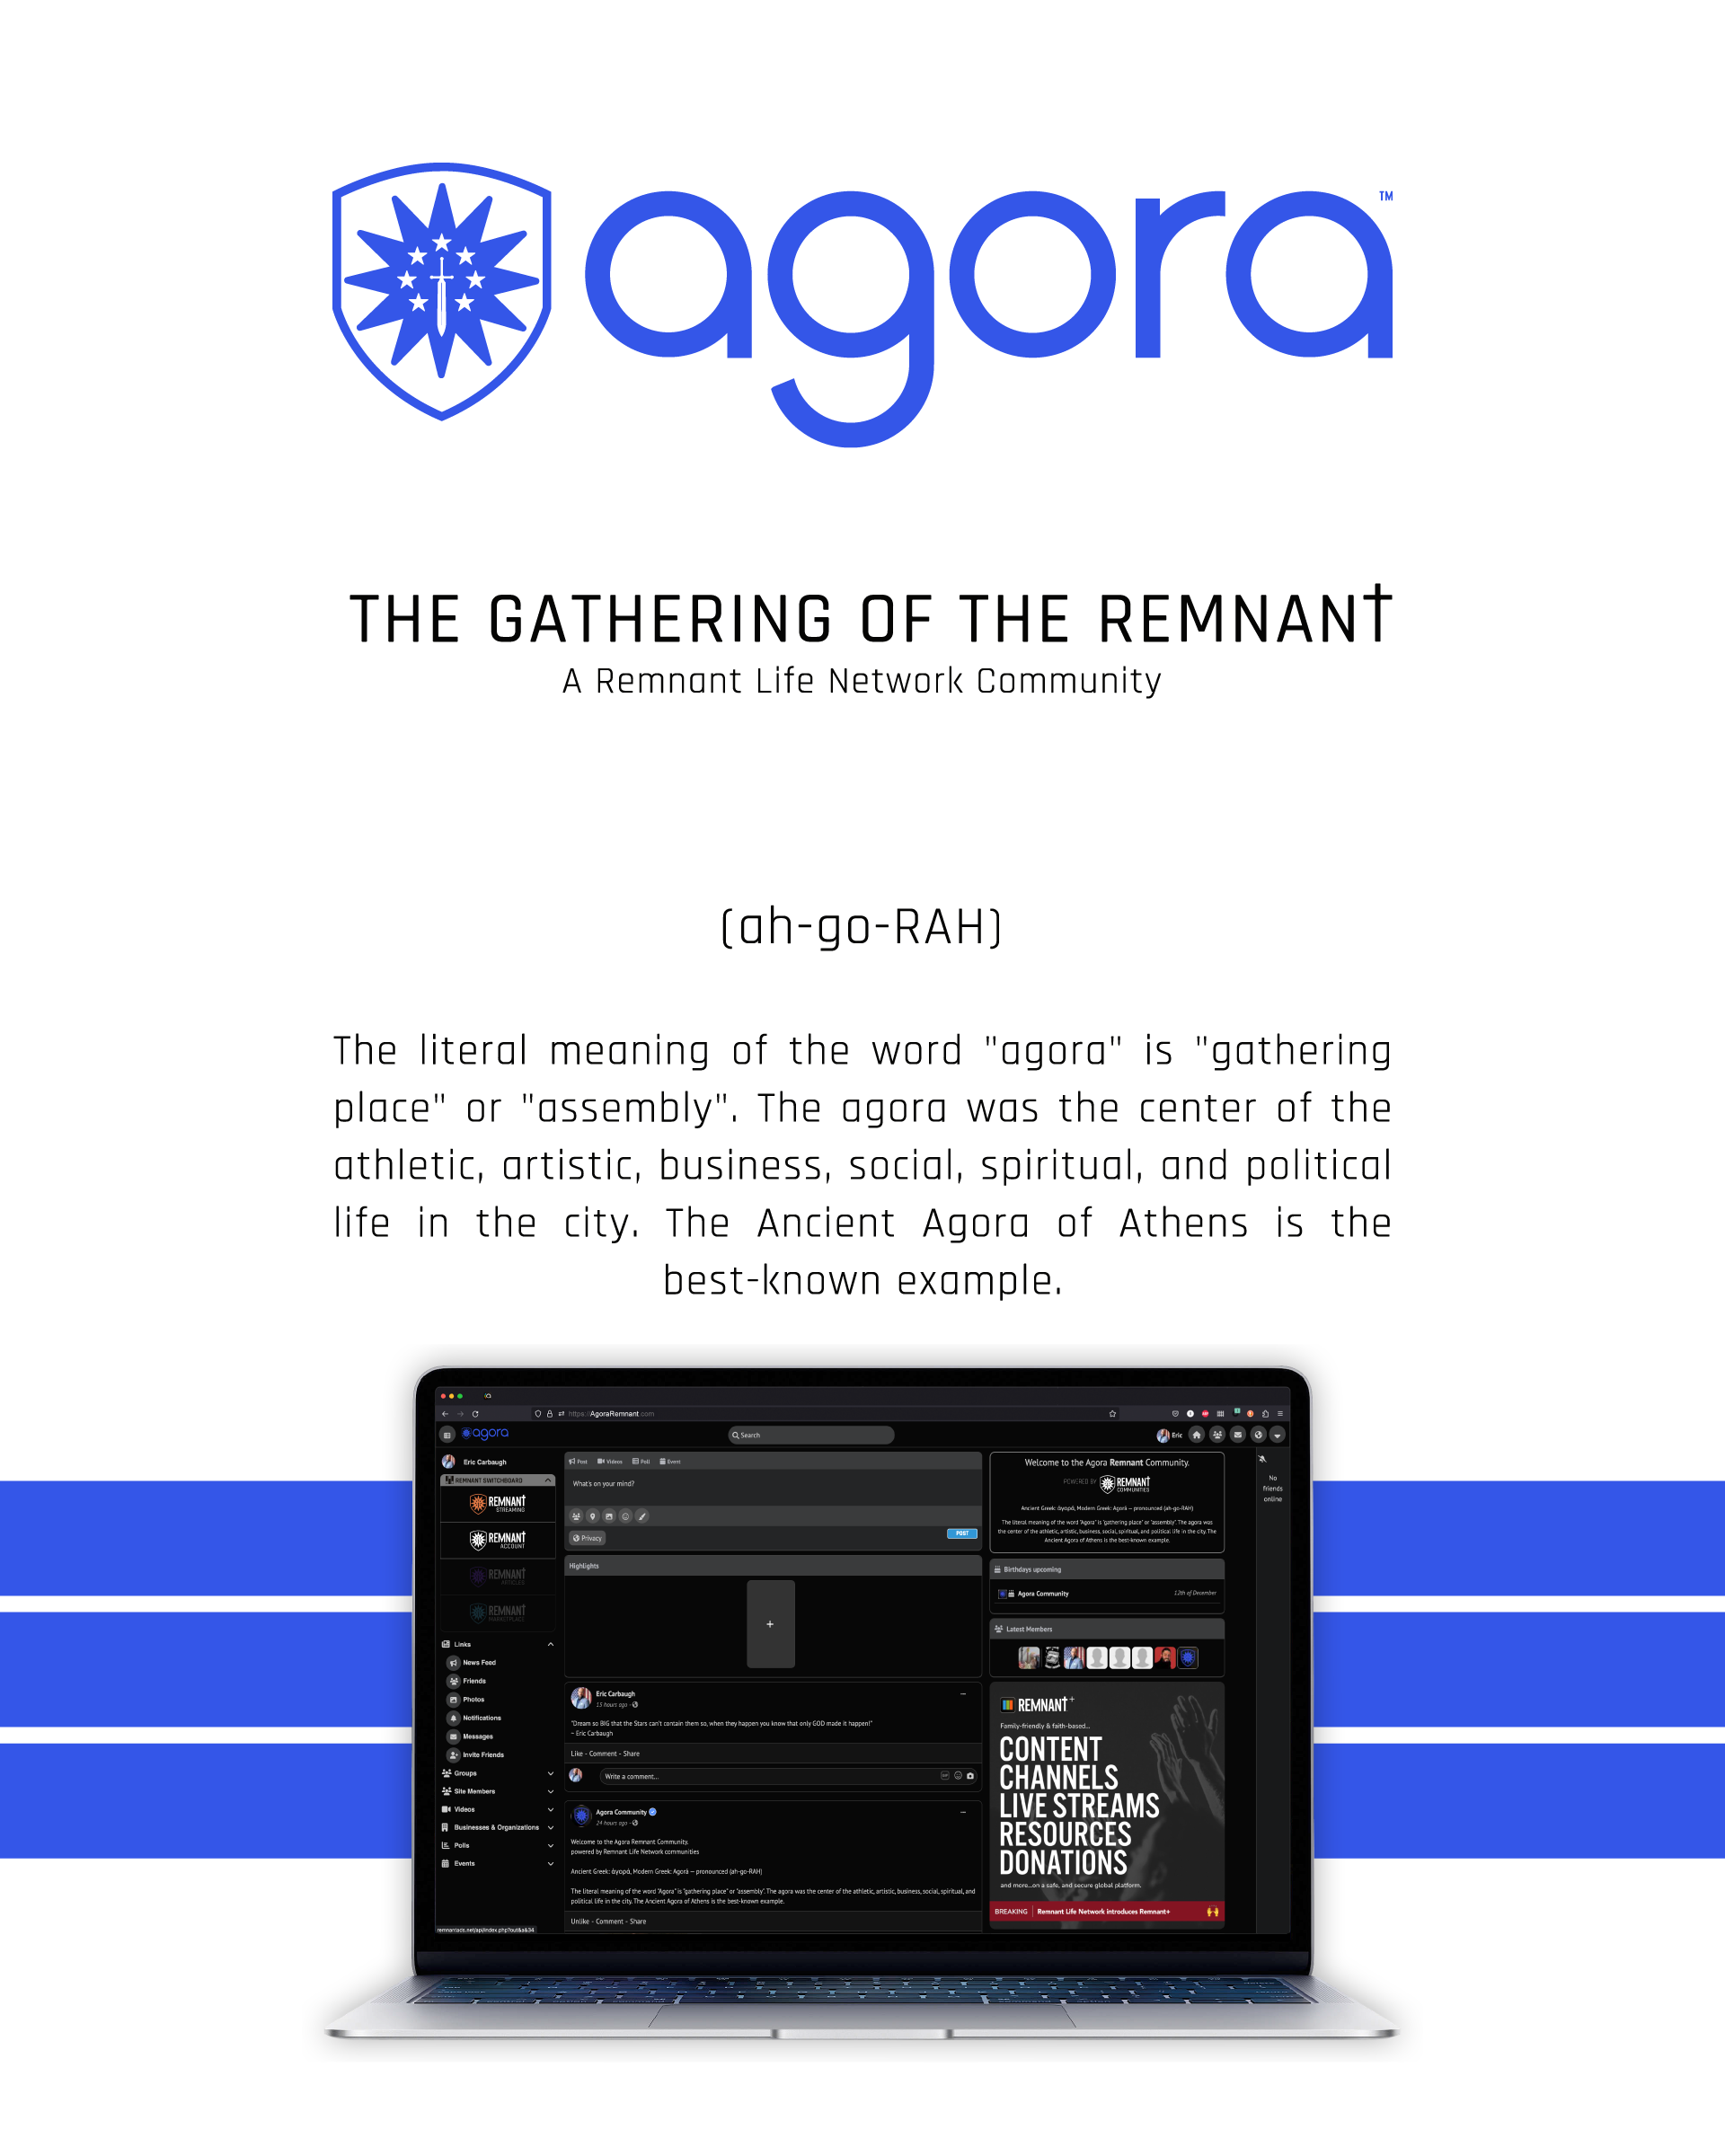 AGORA – The Gathering of the Remnant - A Remnant Life Network Community